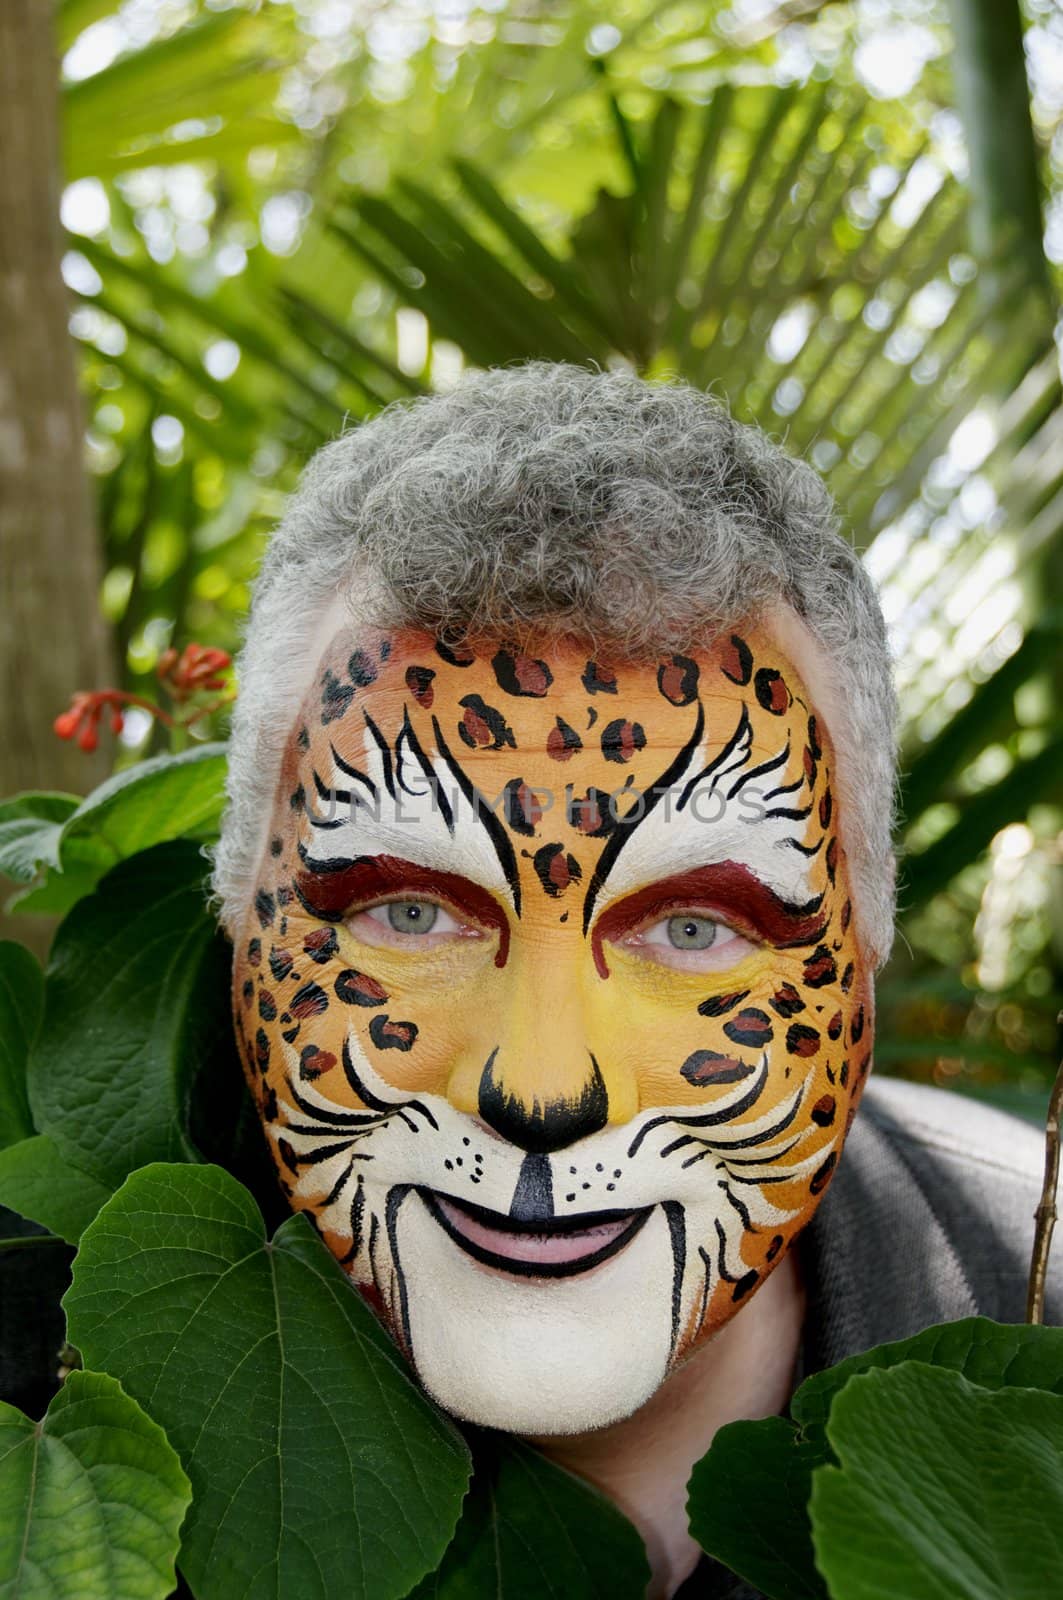 A smiling man with his face painted to look like a leopard.